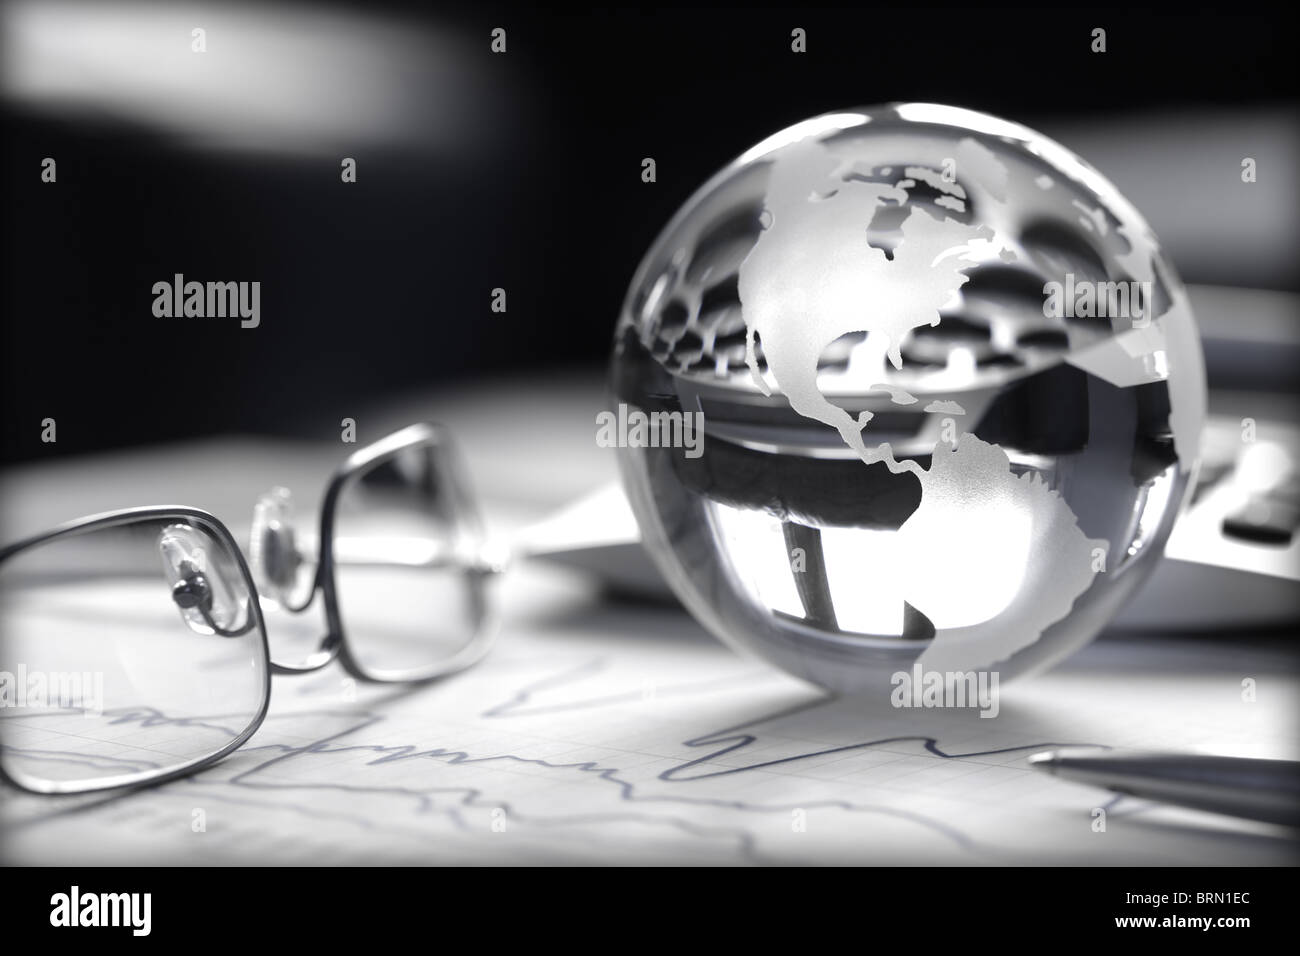 Toned image of glass globe with stock charts, calculator and spectacles Stock Photo